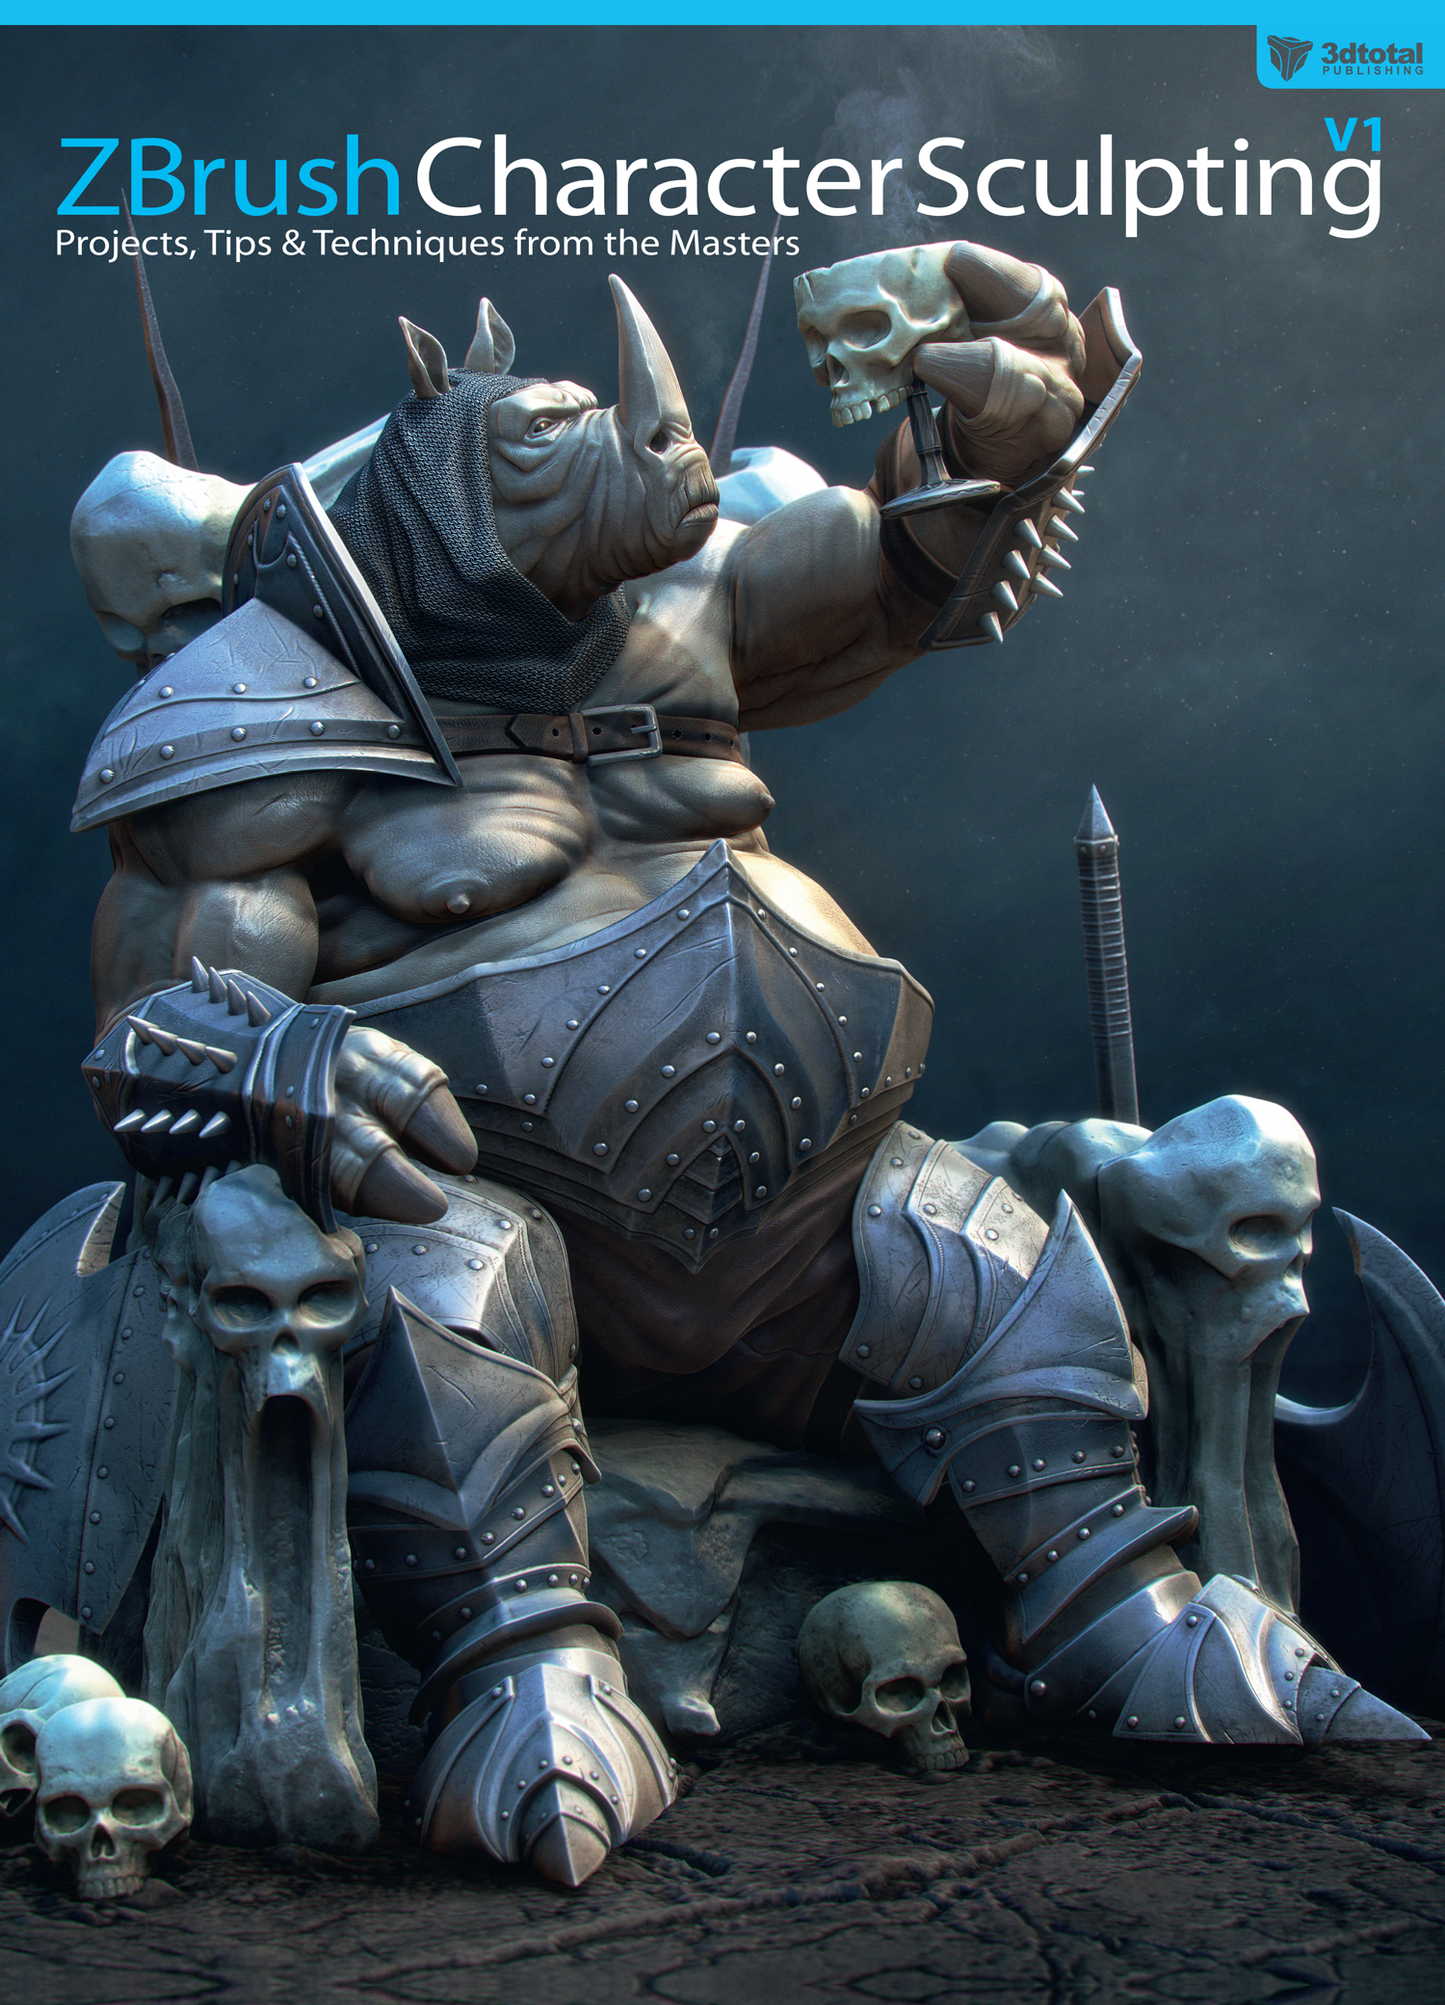 'ZBrush Character Sculpting v1' book cover showing a rhinoceros warrior sitting on a throne, wearing armour, holding a skull.